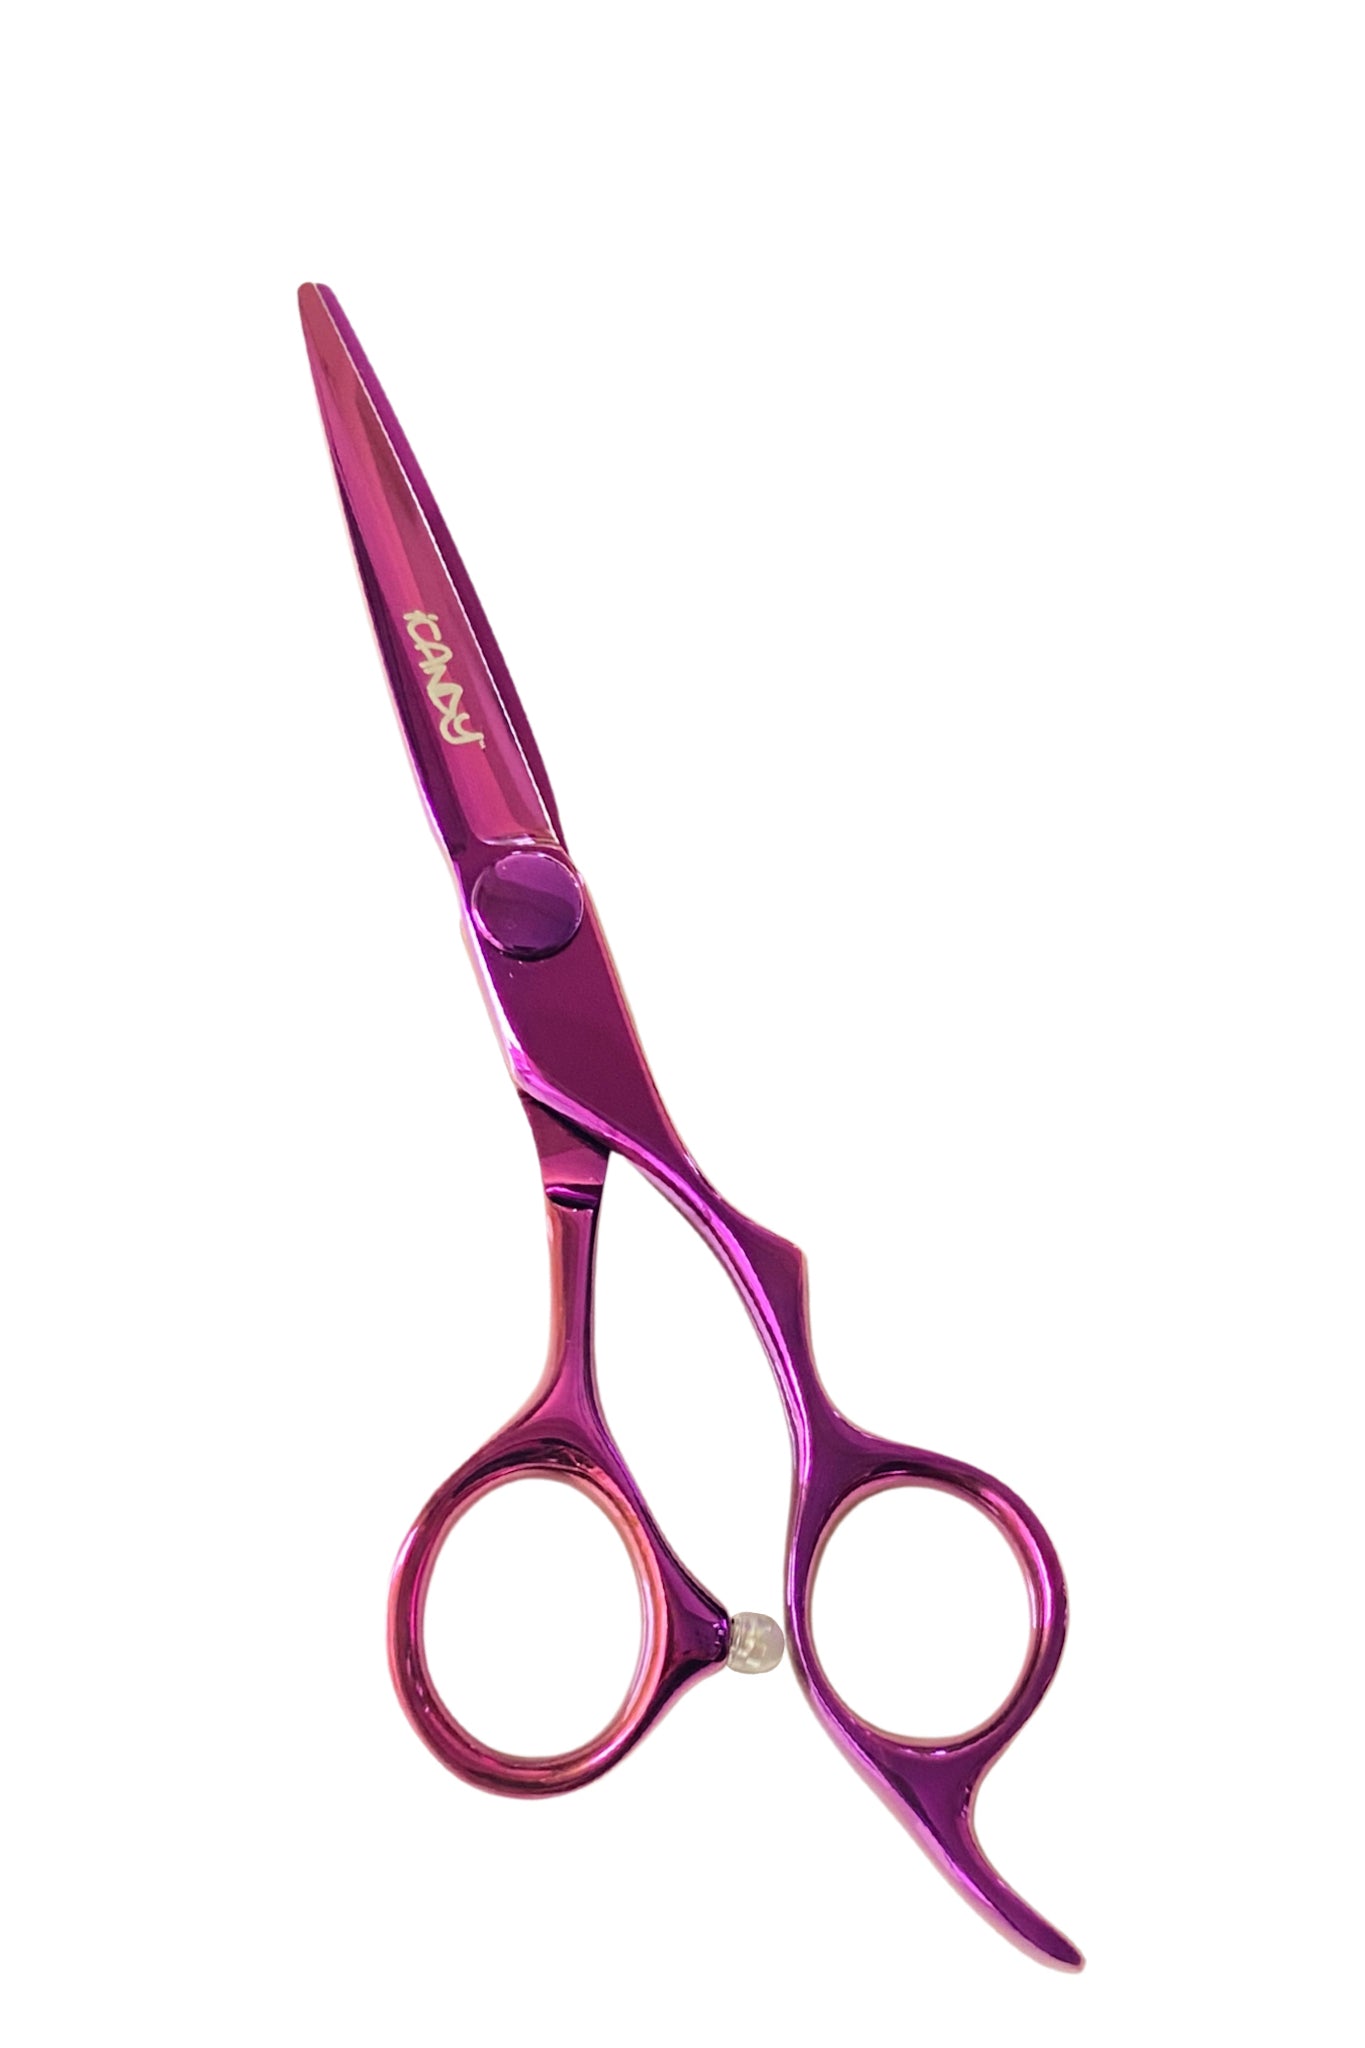 iCandy ELECTRO Ultra Pink VG10 Scissor (5.5 inch) Limited Edition! – iCandy  Scissors